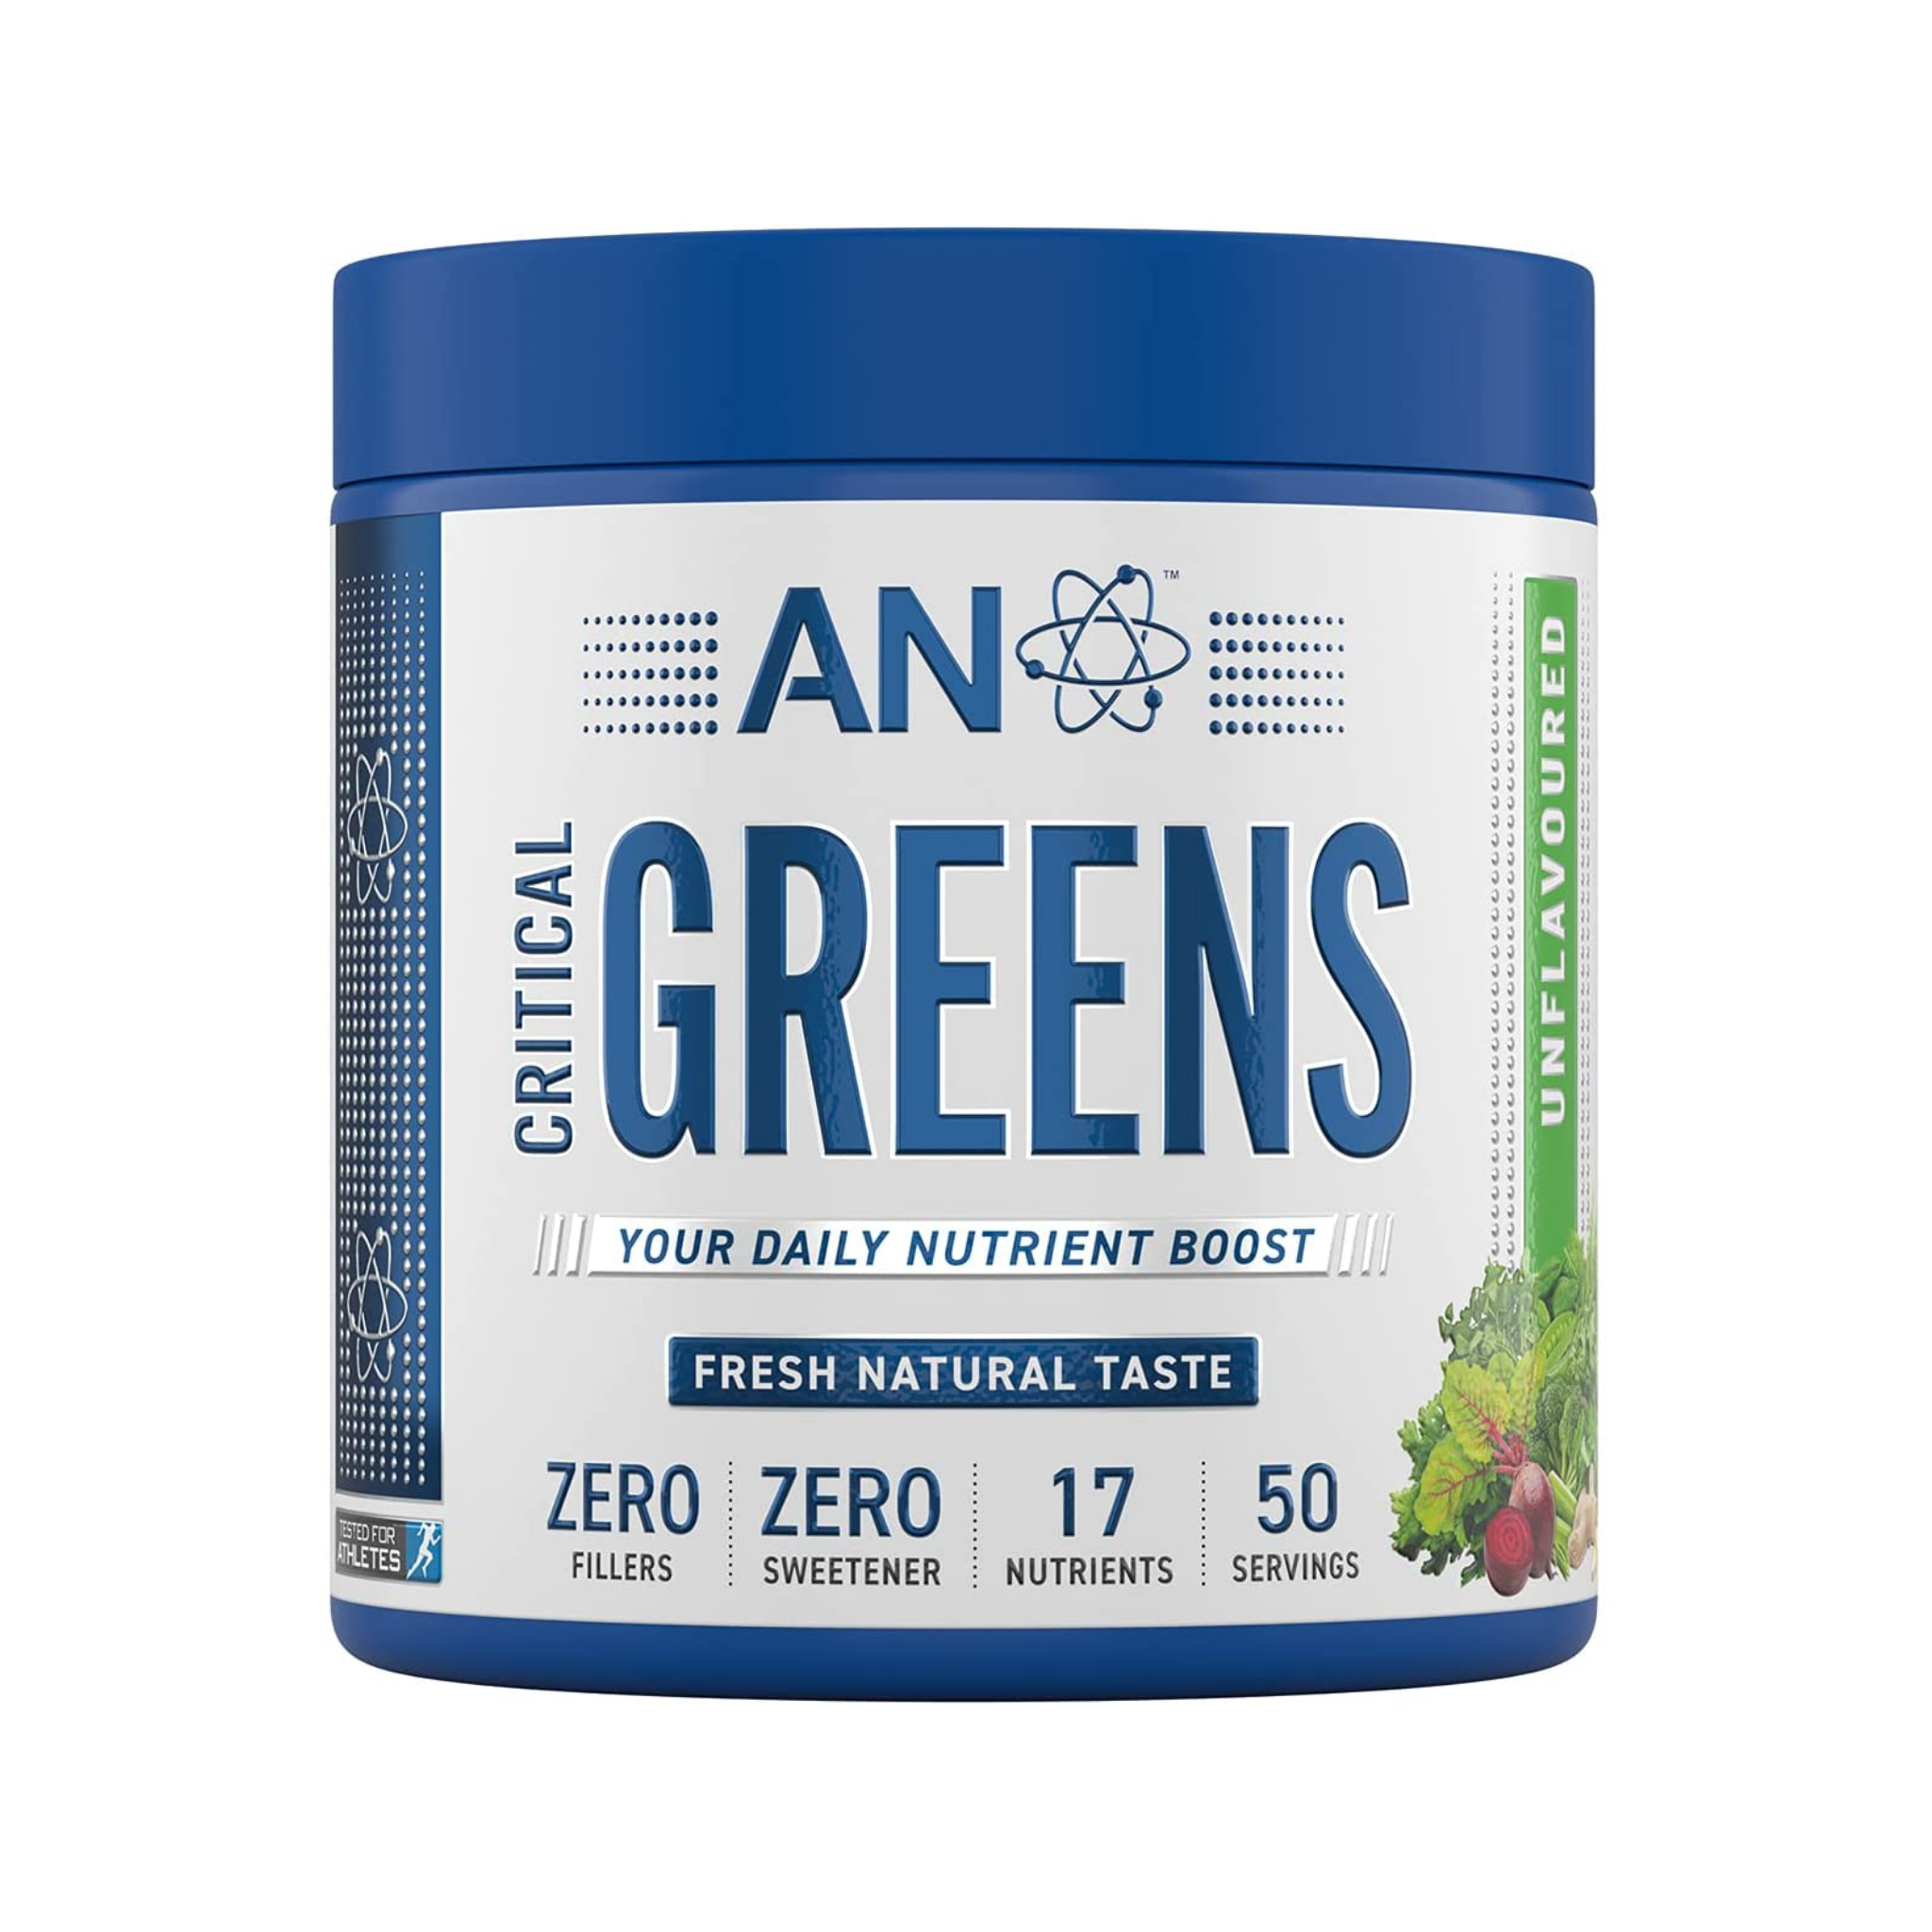 Applied Nutrition Critical Greens, Unflavoured